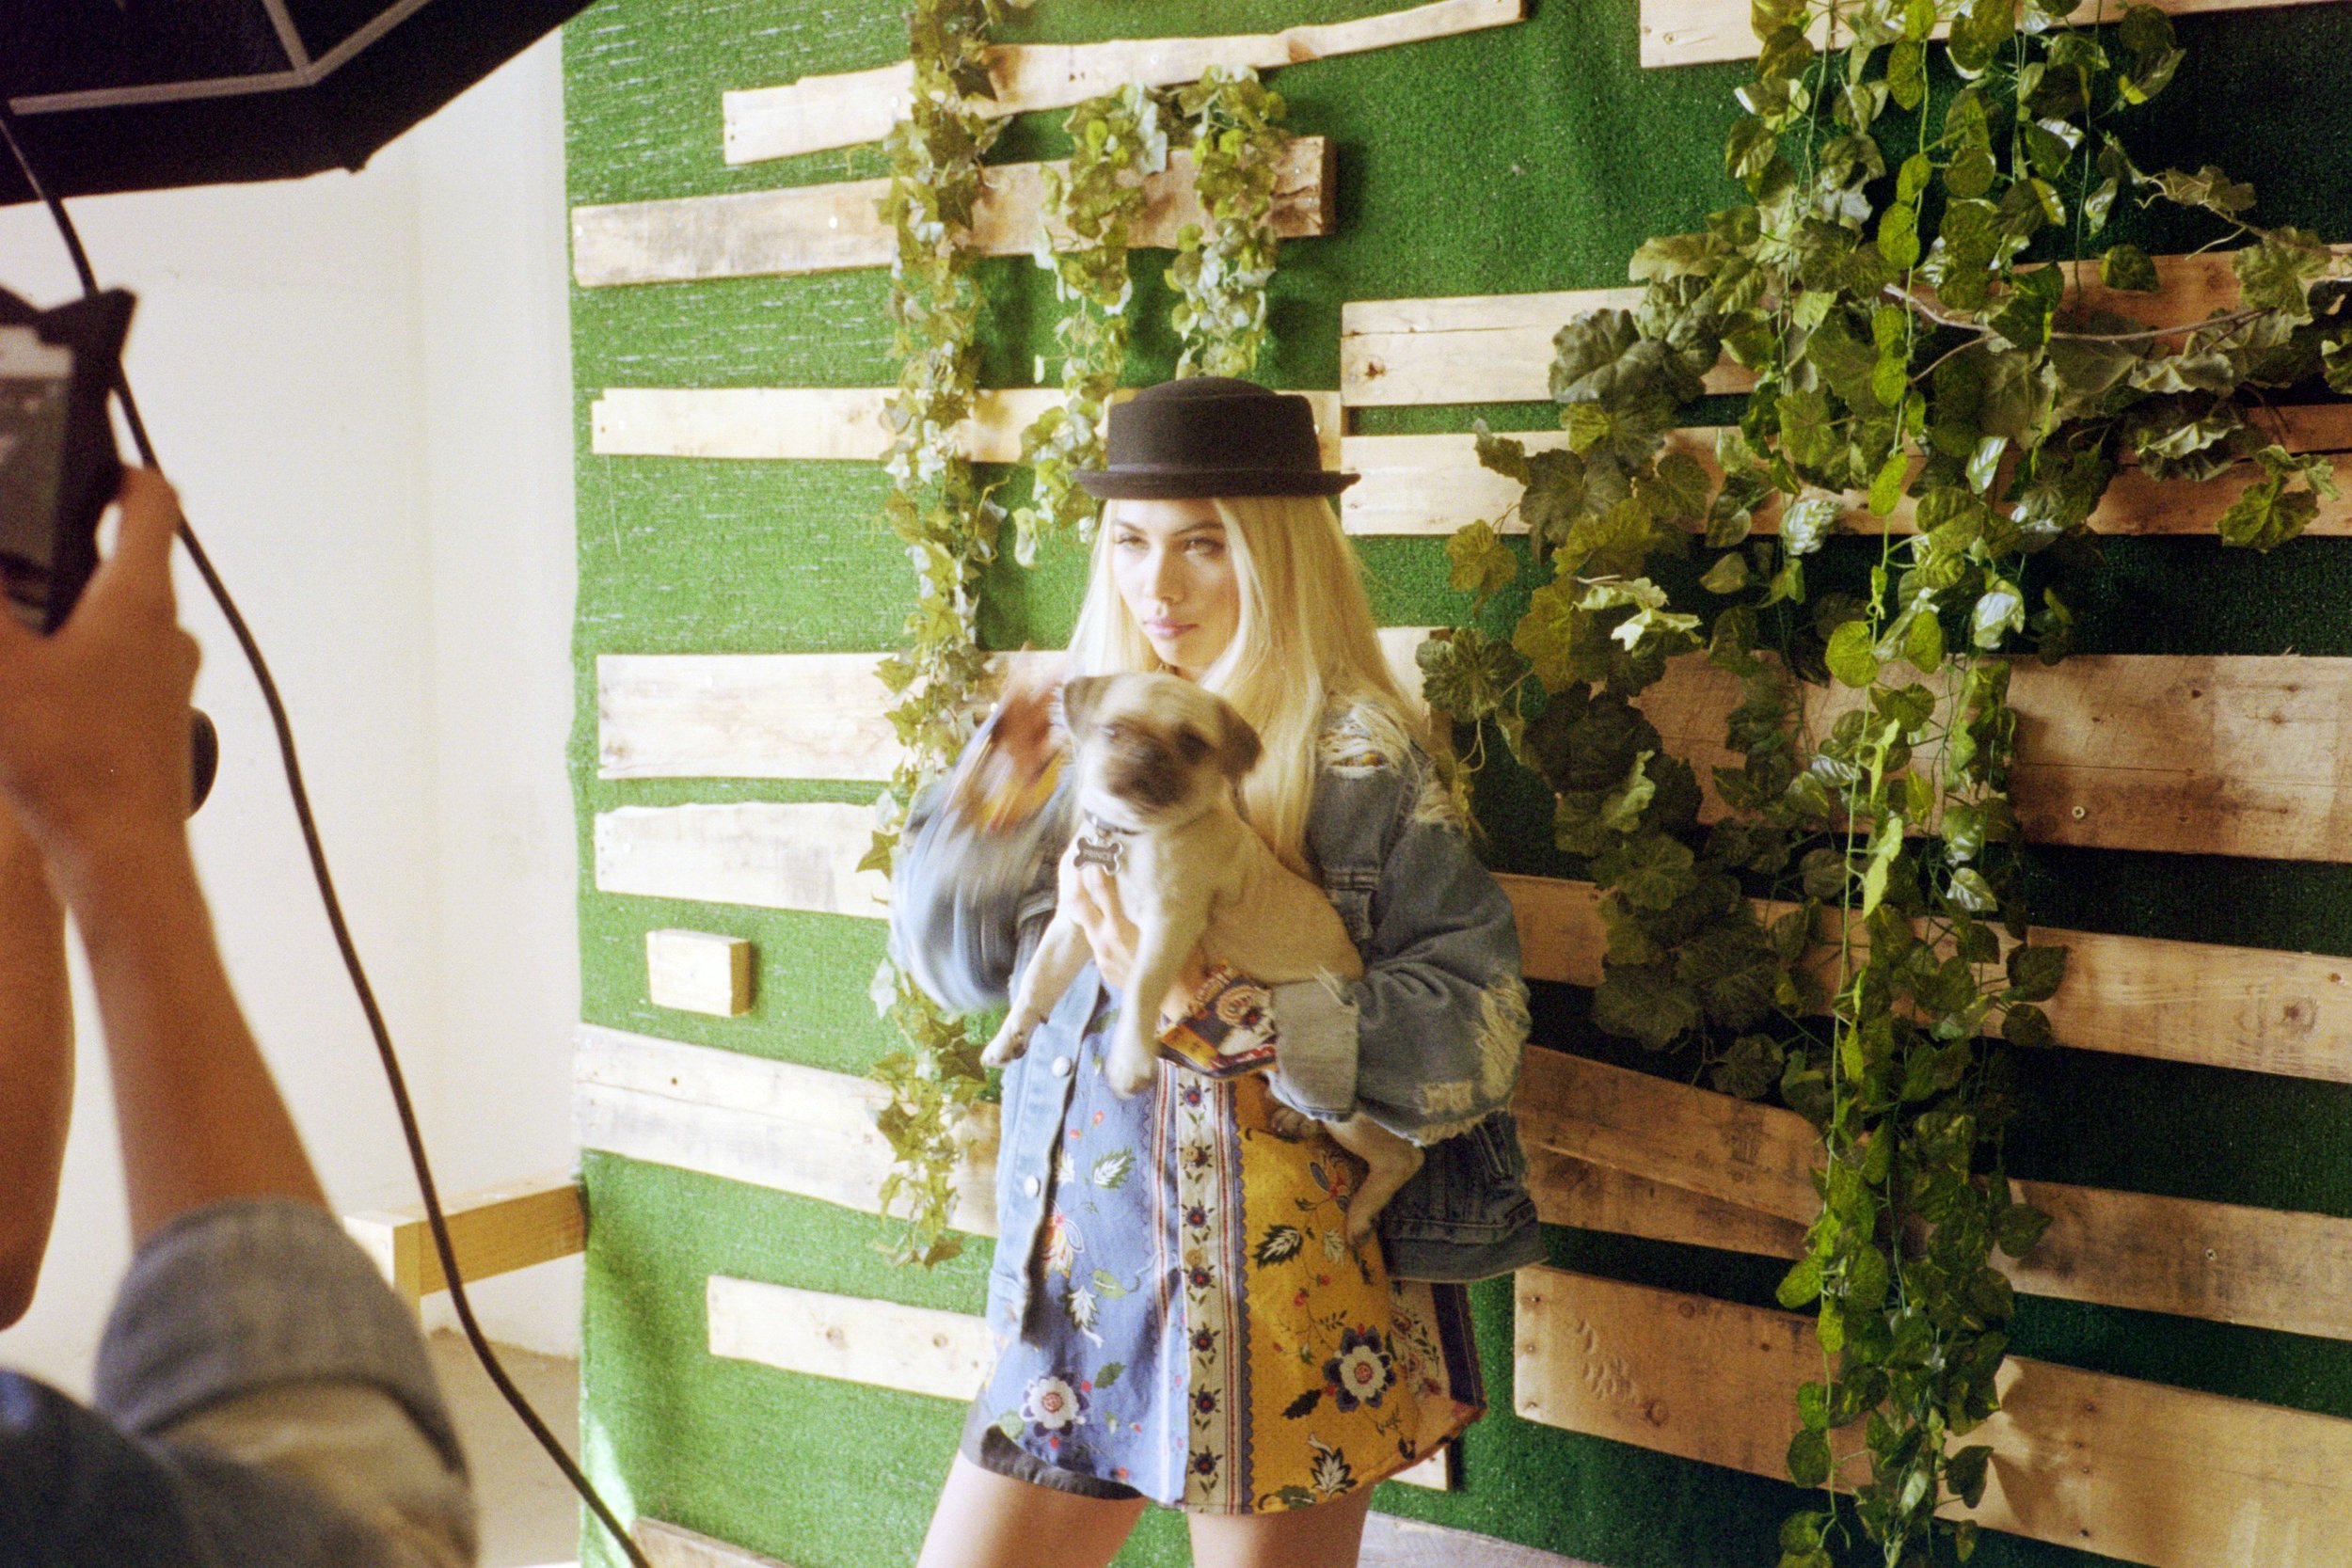  Hayley Kiyoko on the set of her cover shoot for ISSUE 05 of SUSPEND. / Photo: © Diane Abapo 